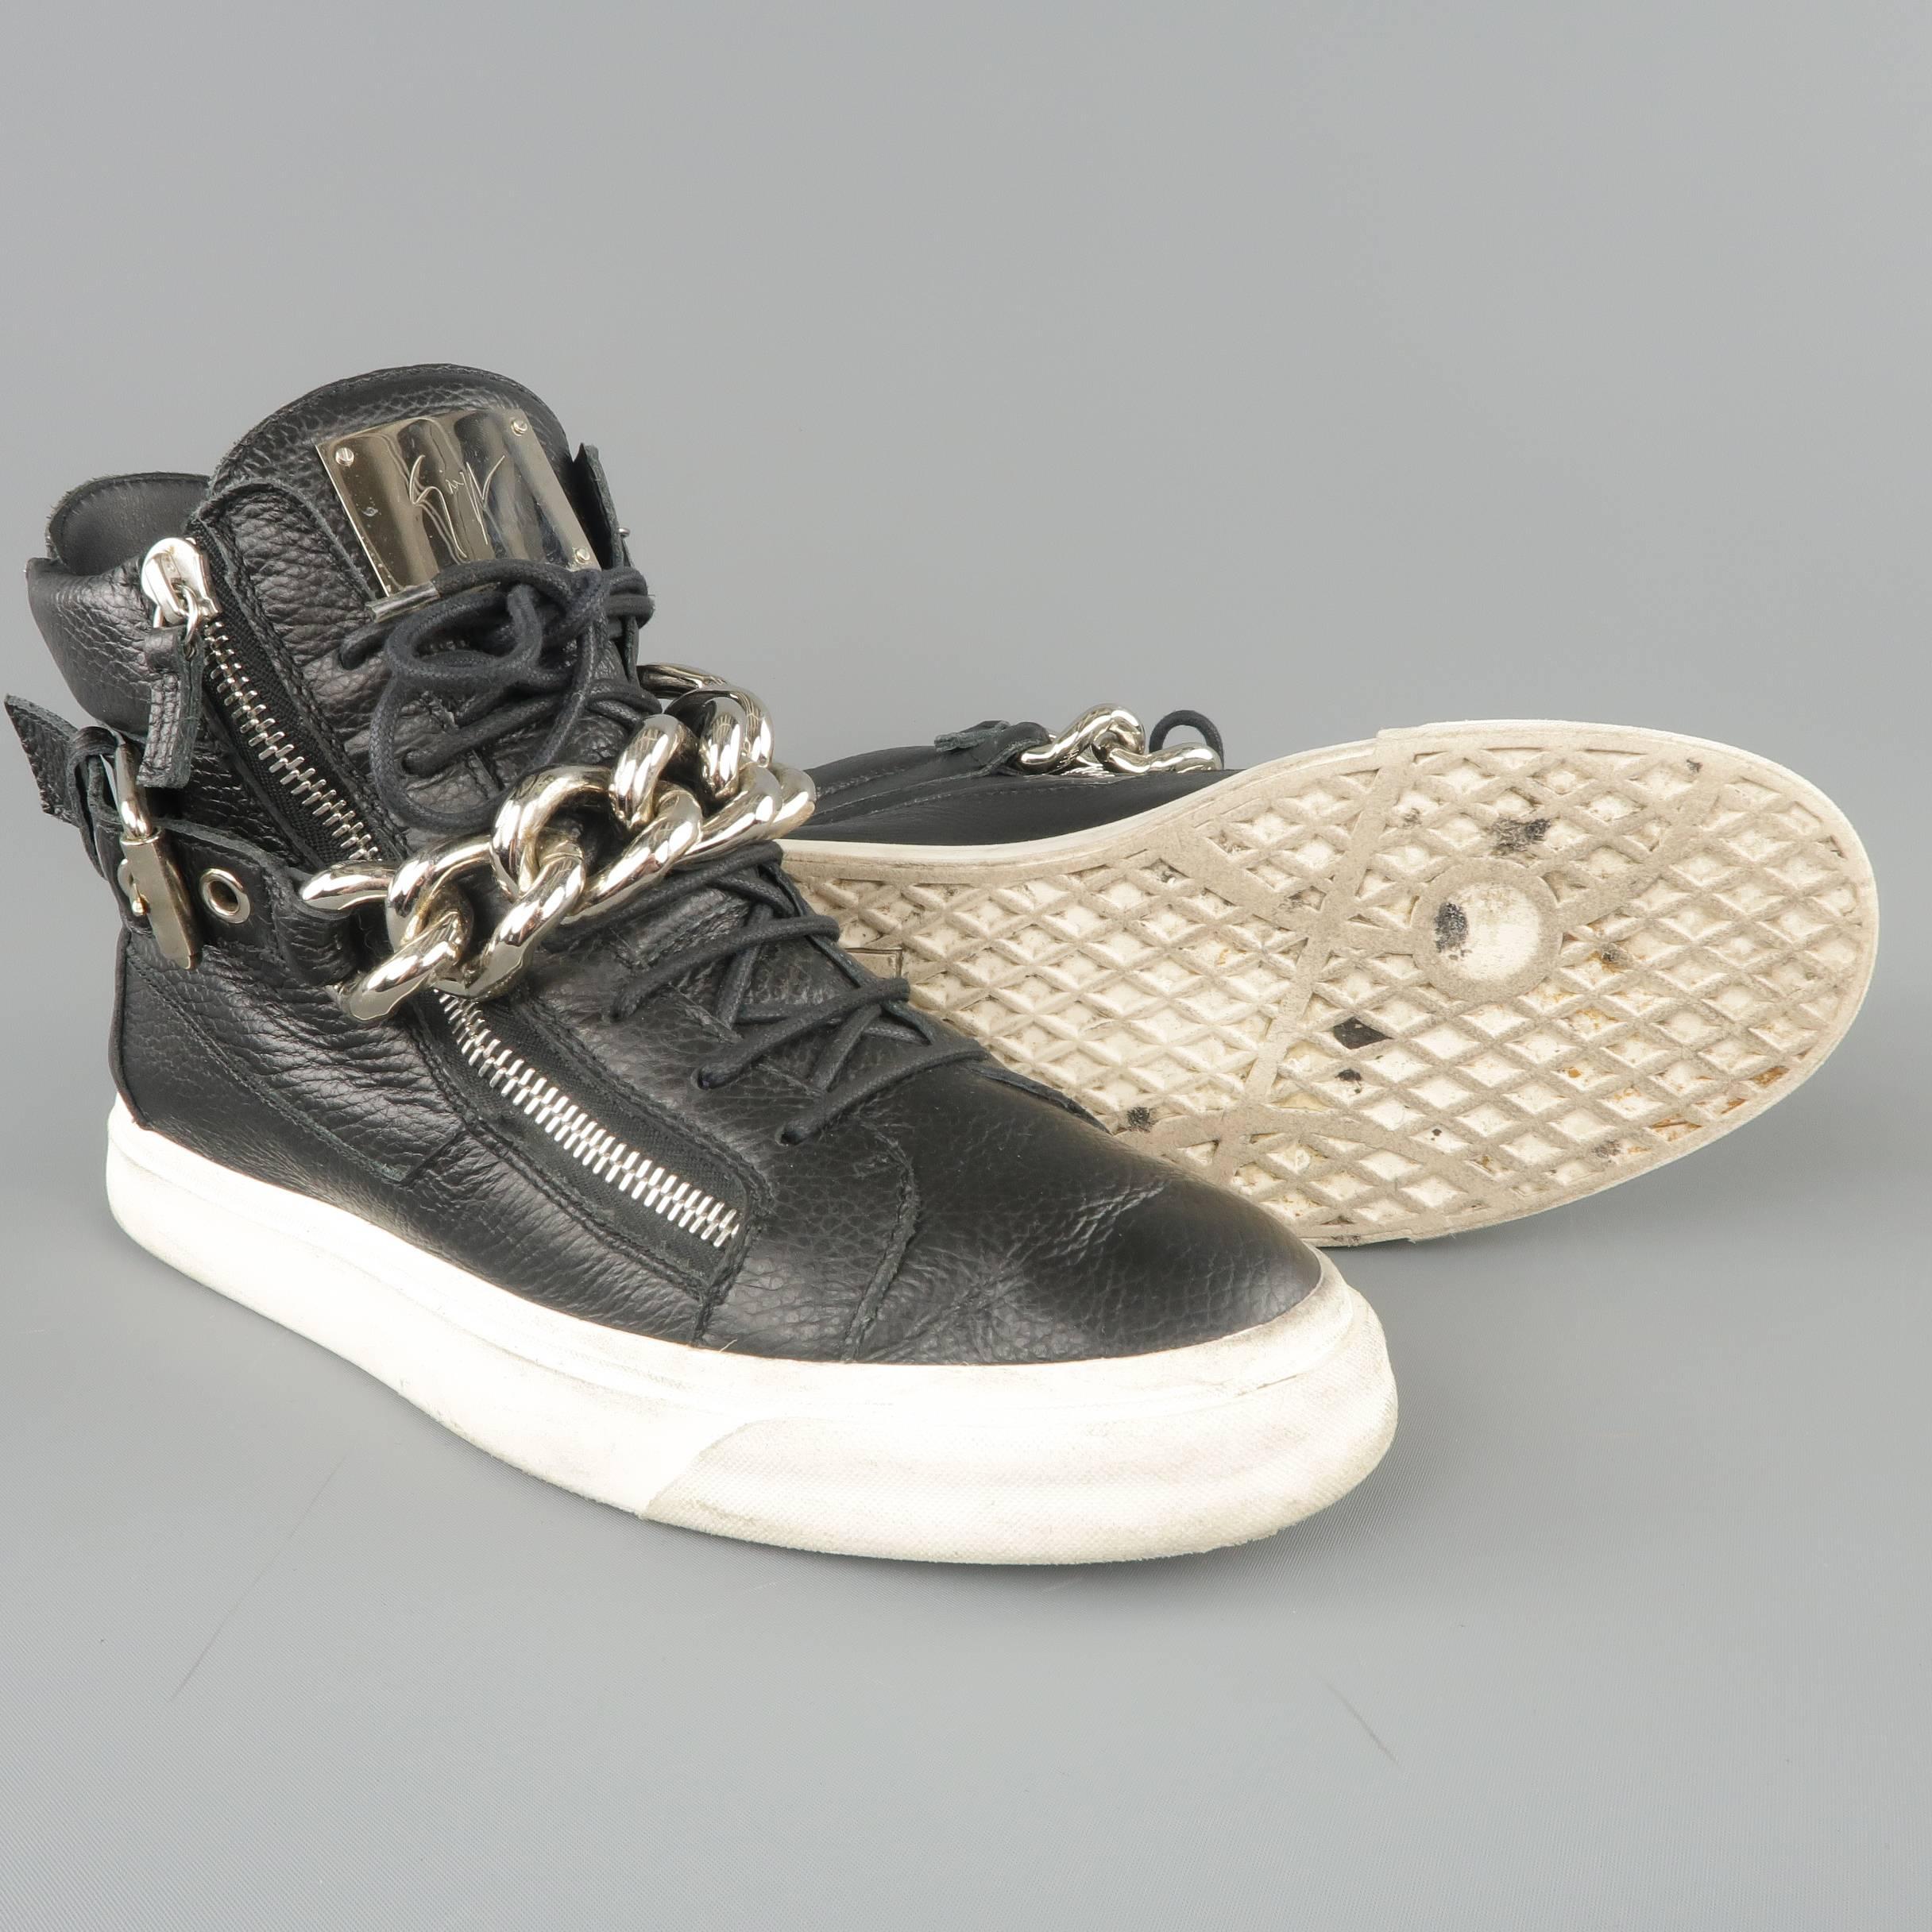 GIUSEPPE ZANOTTI Sneakers 10 Black Textured Leather Silver Chain Bangle High Top 2